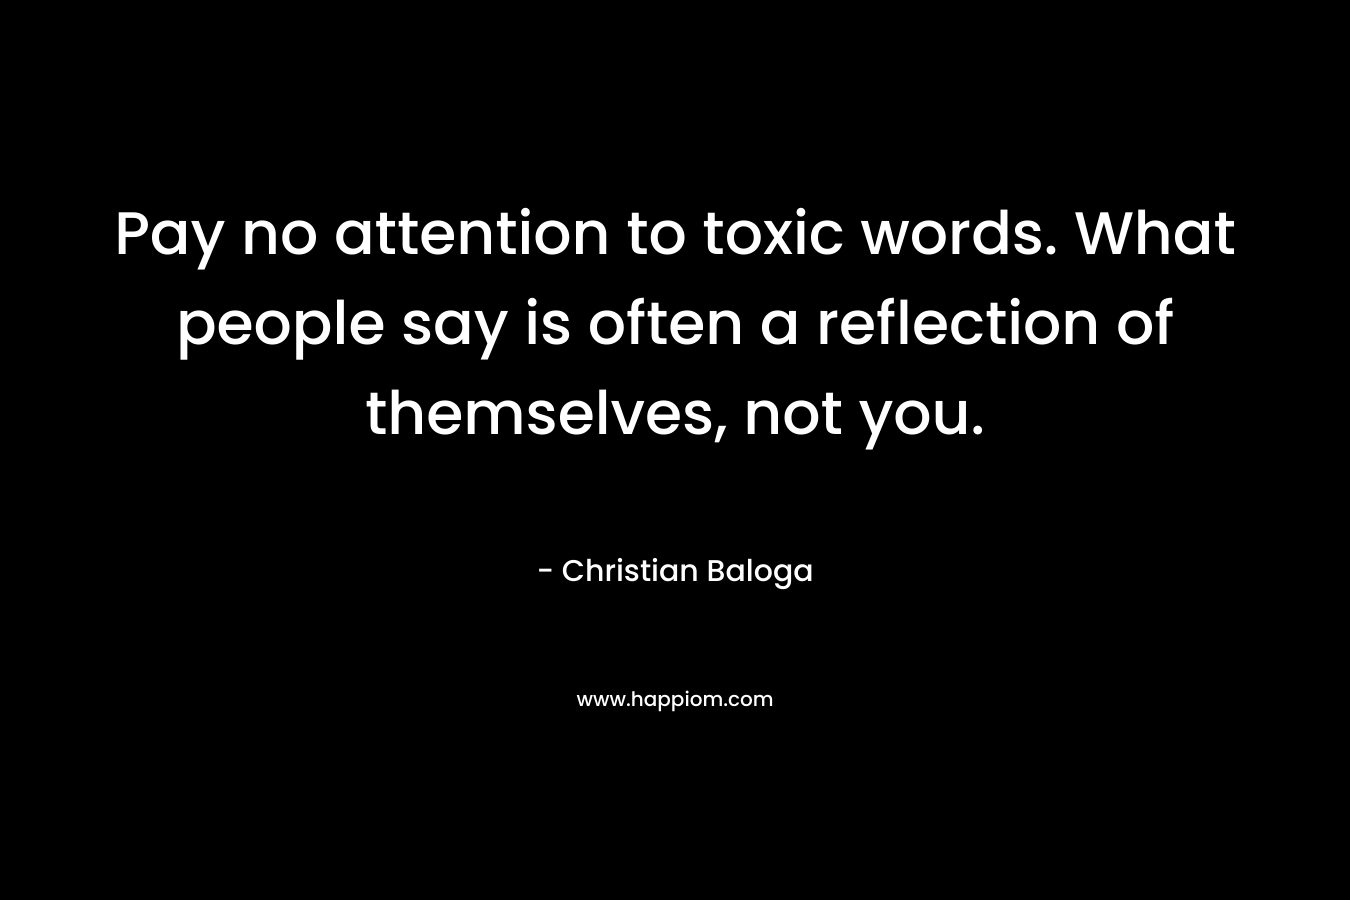 Pay no attention to toxic words. What people say is often a reflection of themselves, not you.